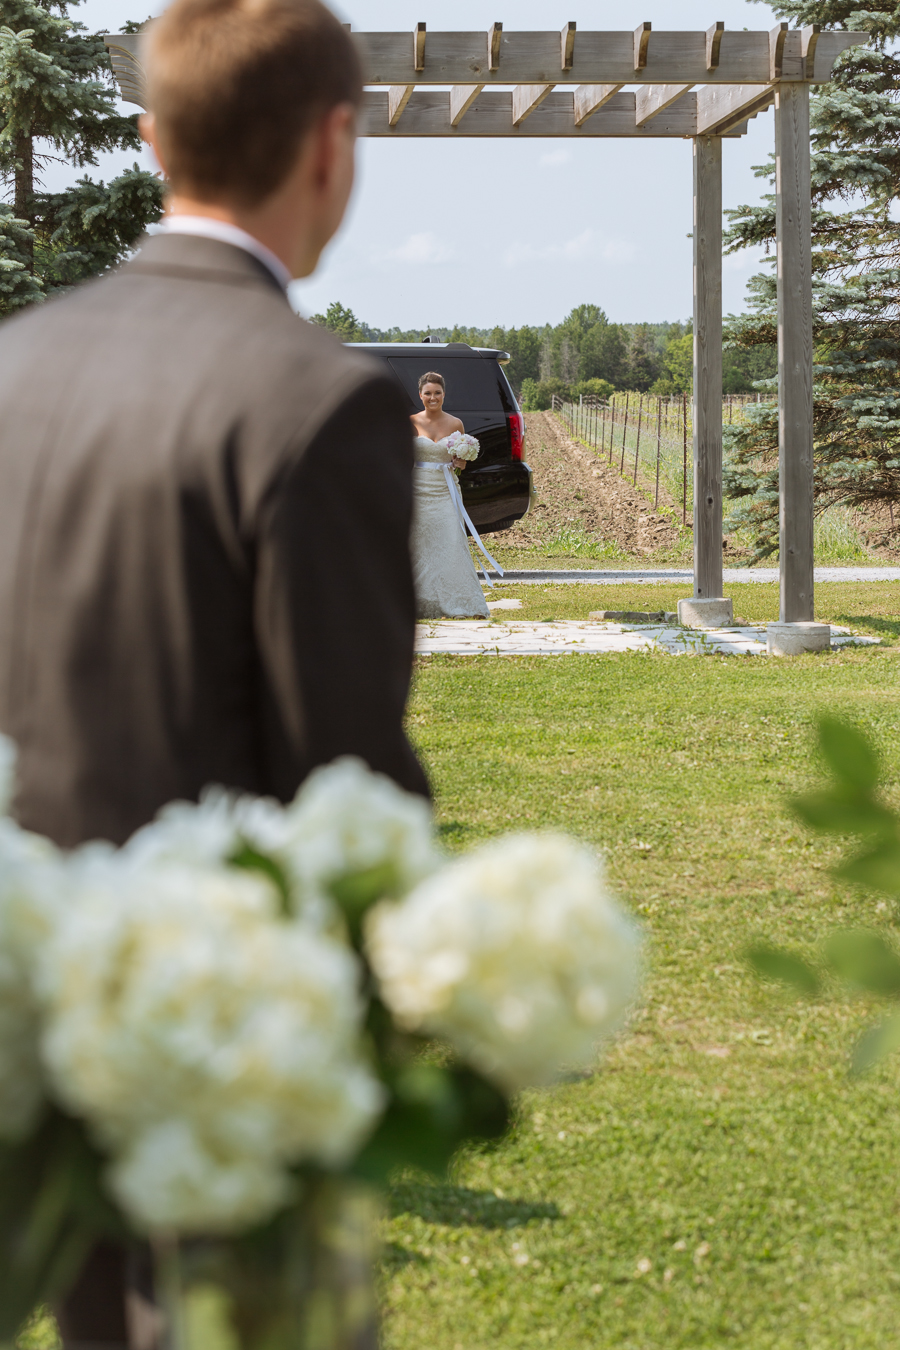  Willow Springs Winery Summer Wedding, Stouffville, Ontario: Hilary & Kevin, July 4, 2015 